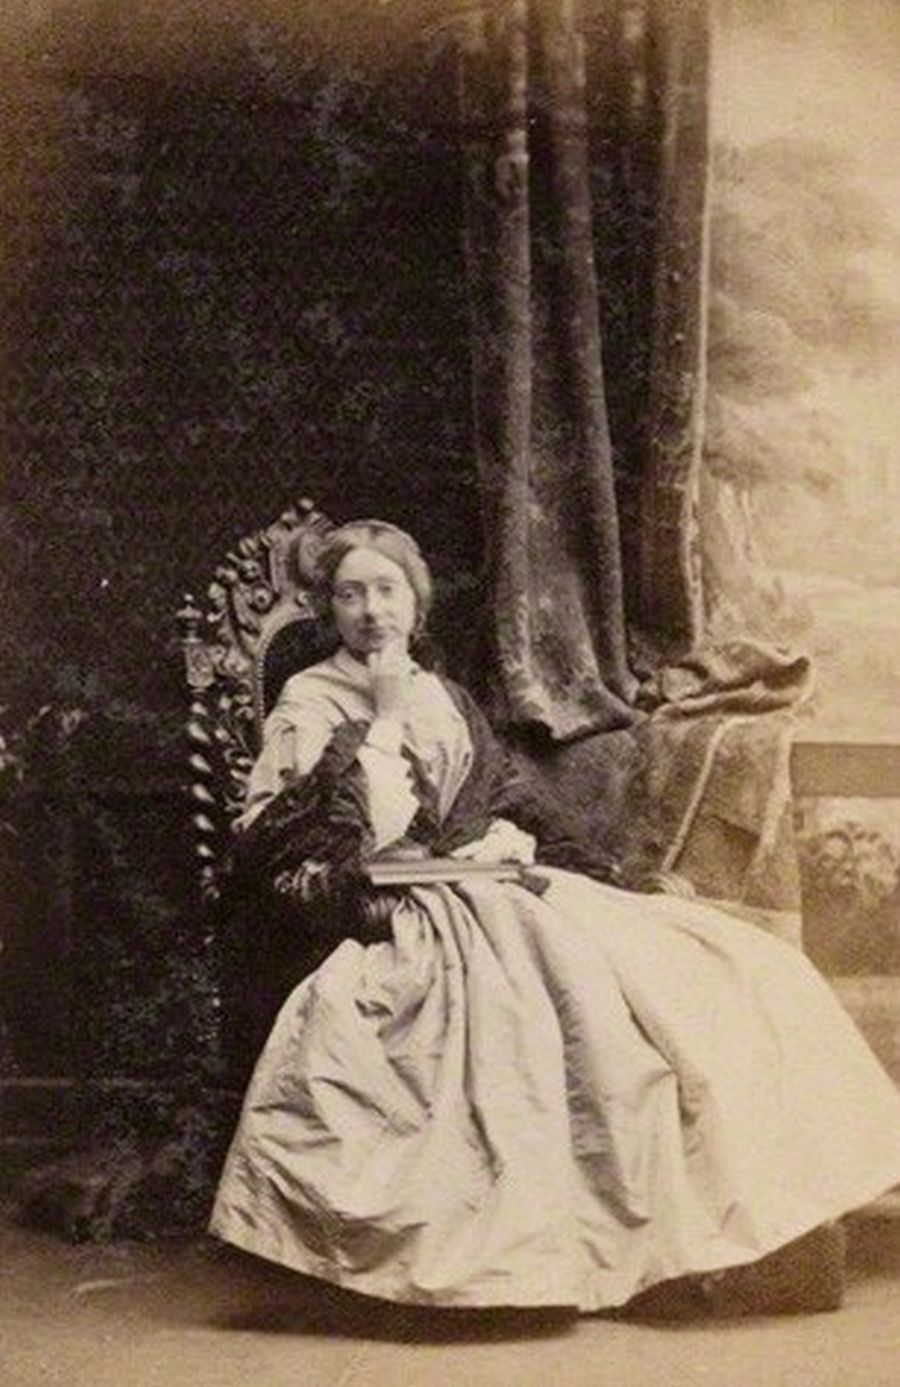 Maude Stanley 1861. Photograph by  Camille Silvy - Widipedia pd